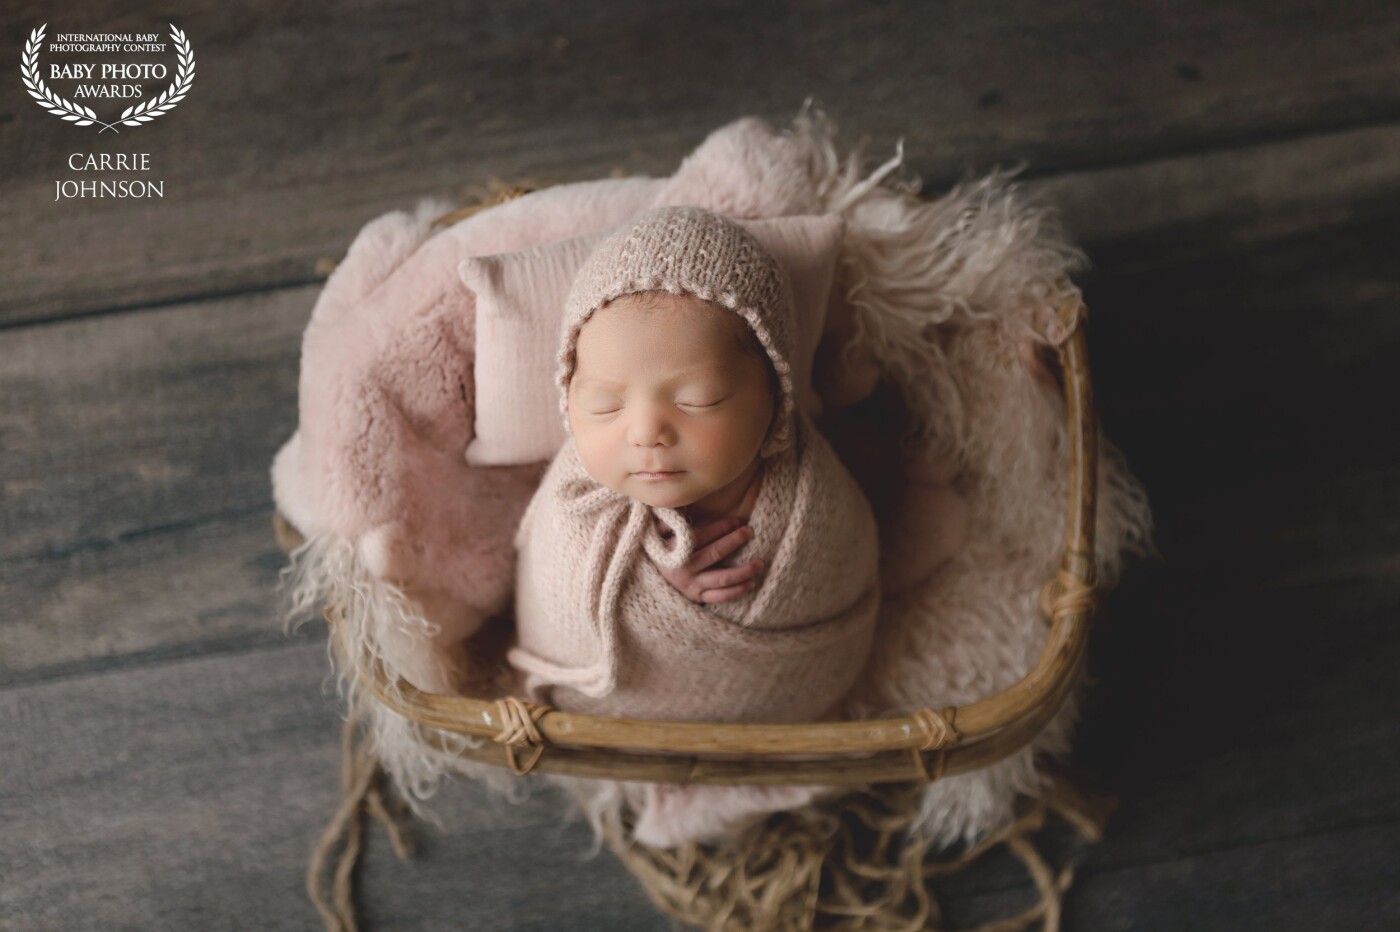 This little girl came into the studio at just 5 days old. She slept like a angel and looked so pretty all wrapped up in this pink setup.